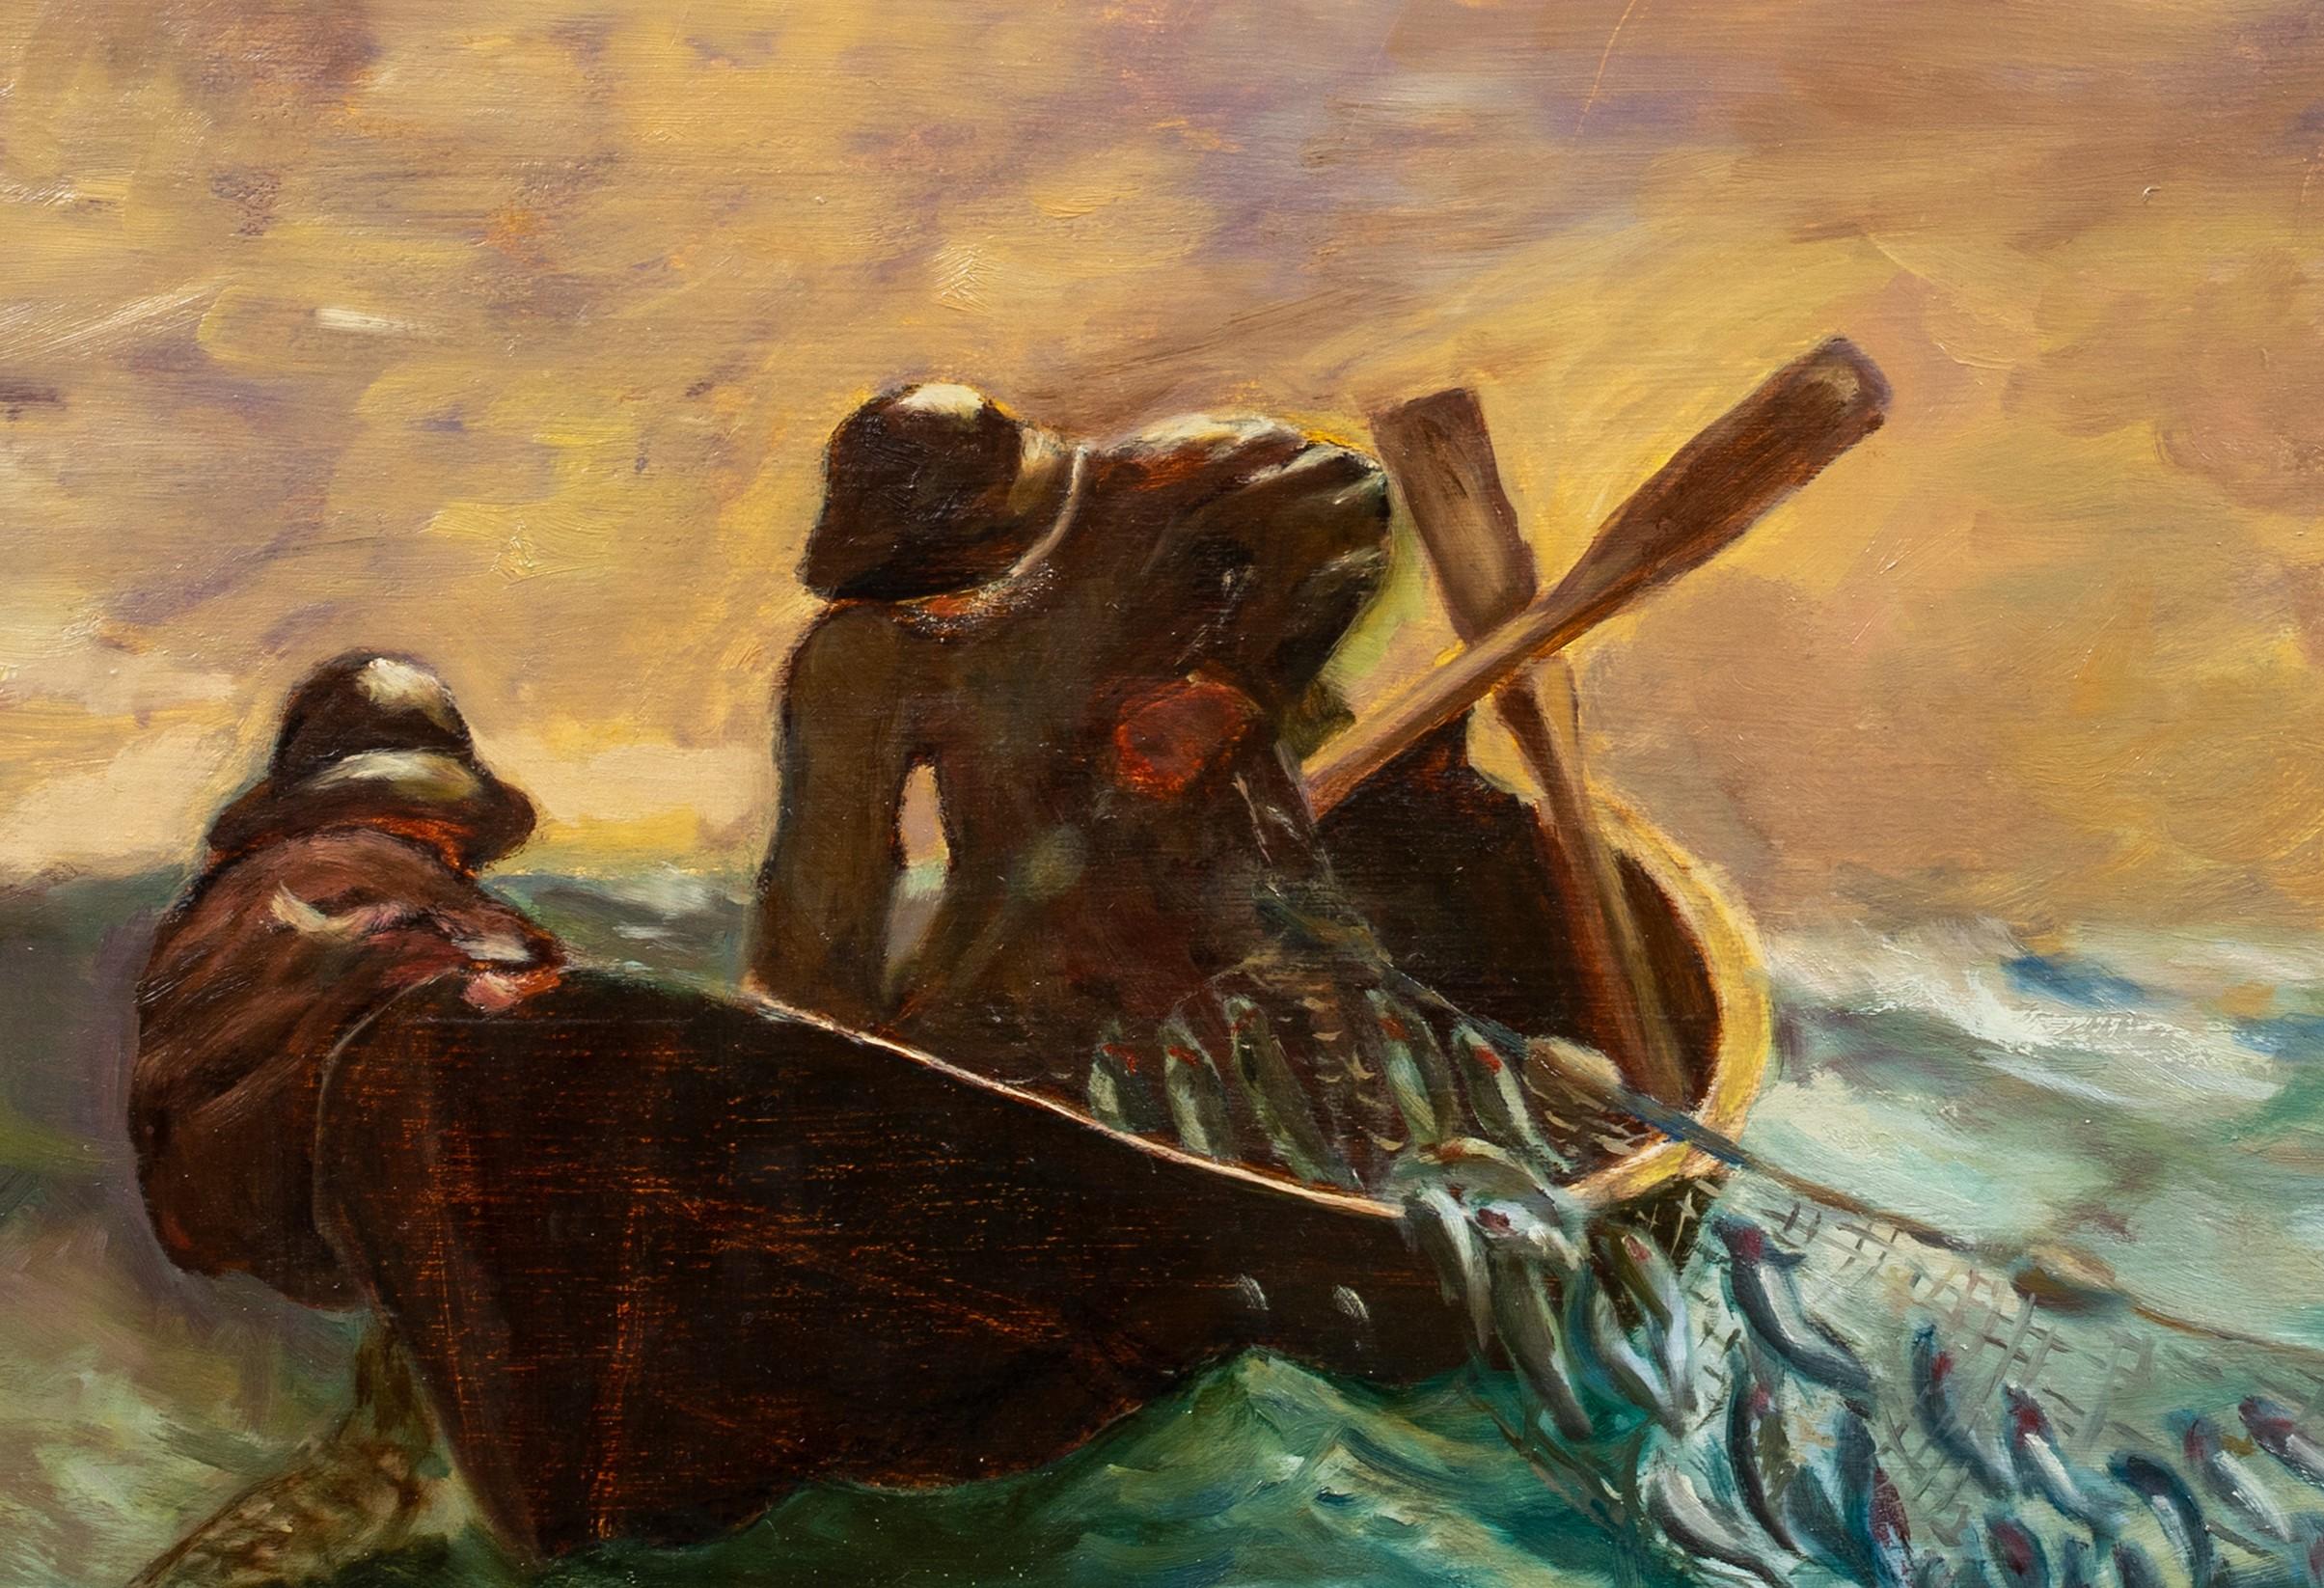 The Herring Net, circa 1900

Winslow Homer (1836-1910) interest

Circa 1900 American School scene of fisherman bringing in the herring net, oil on panel. Excellent quality and condition version of Homer's larger work that depicts two anonymous